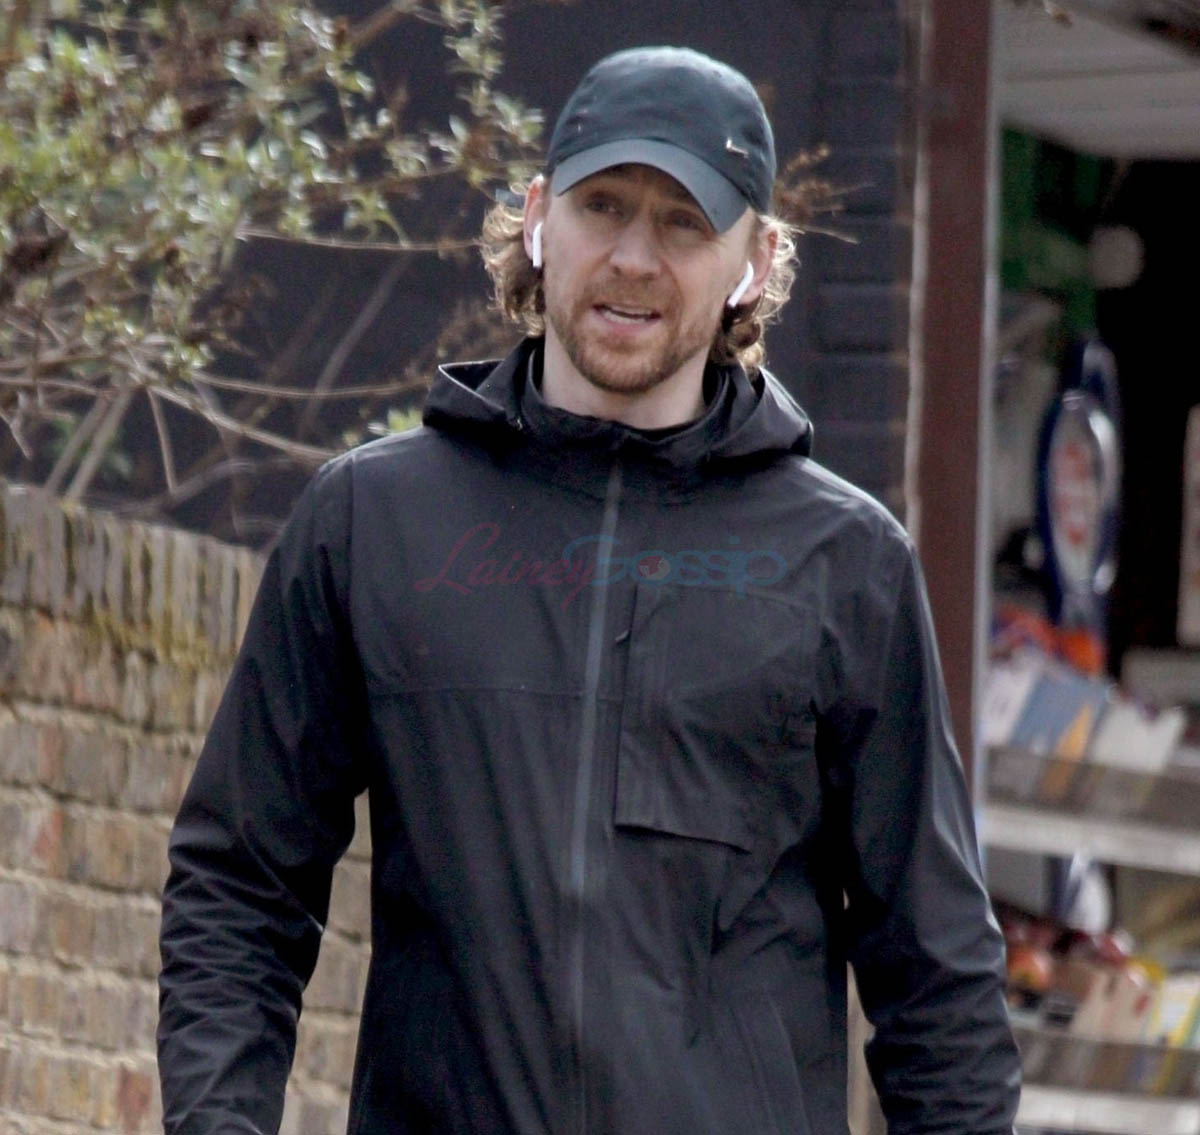 Is Tom Hiddleston Taylor Swift's Lesson #16?